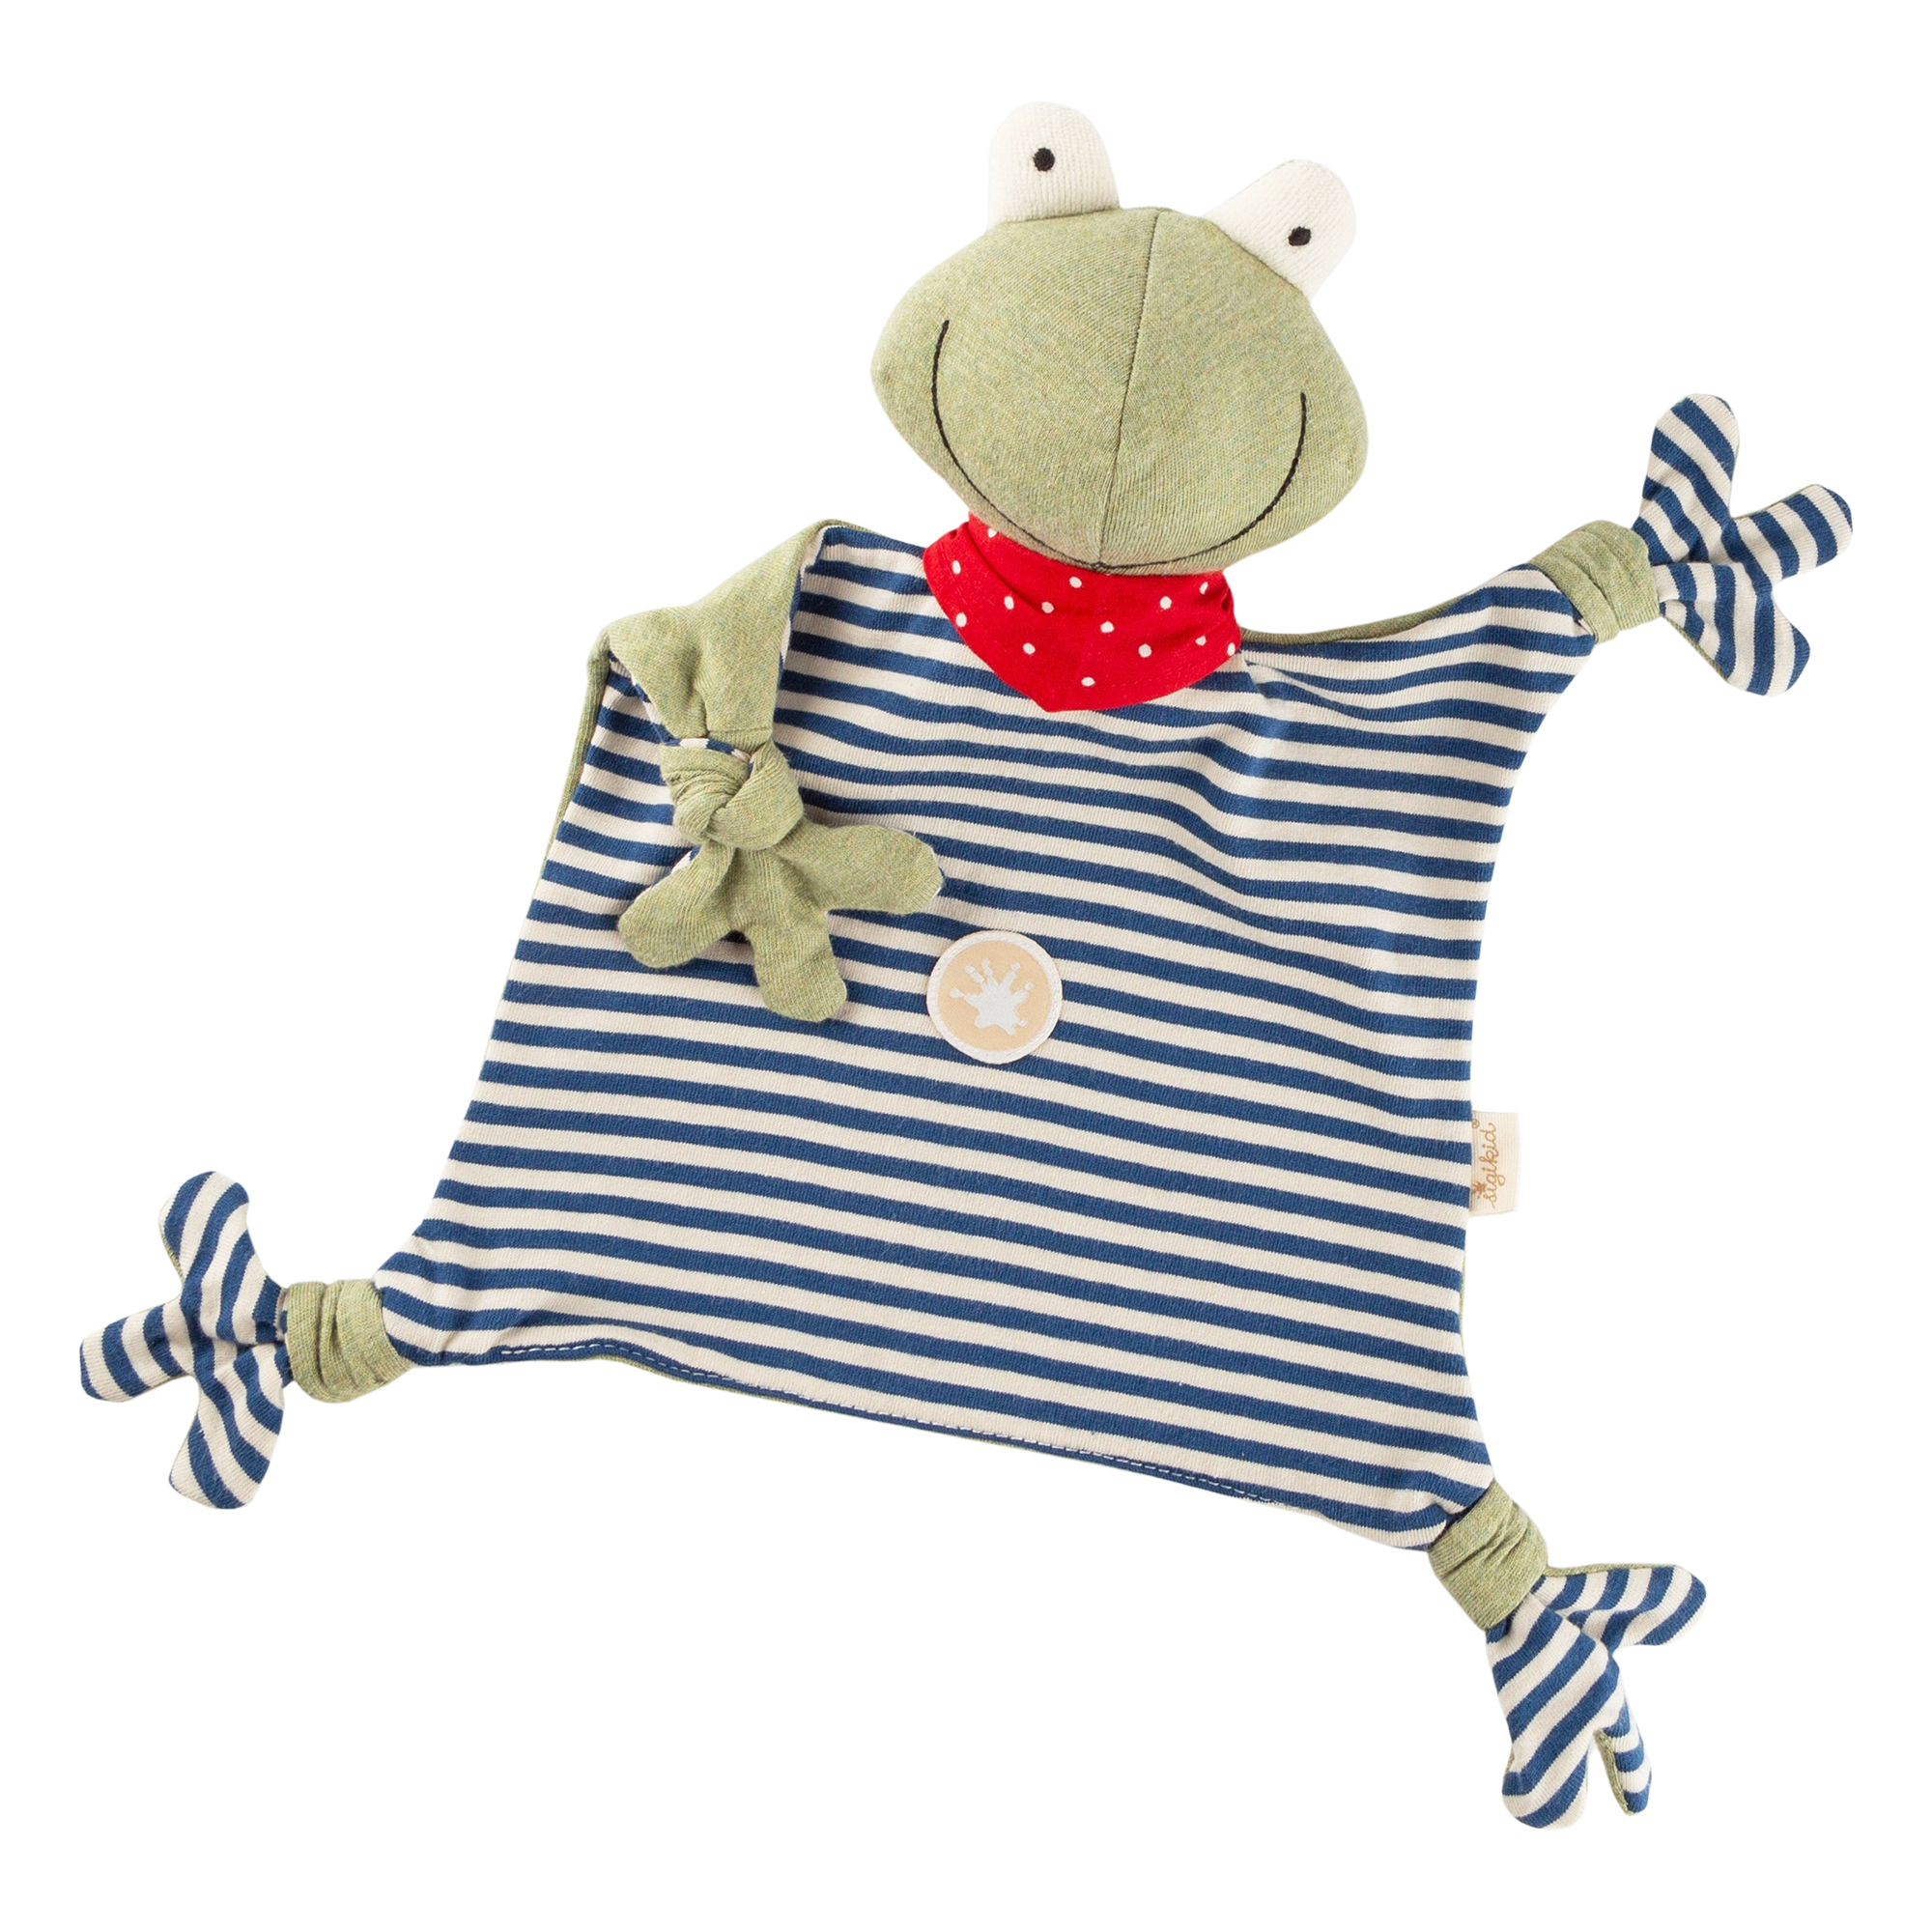 Baby comforter frog, cotton terry cloth